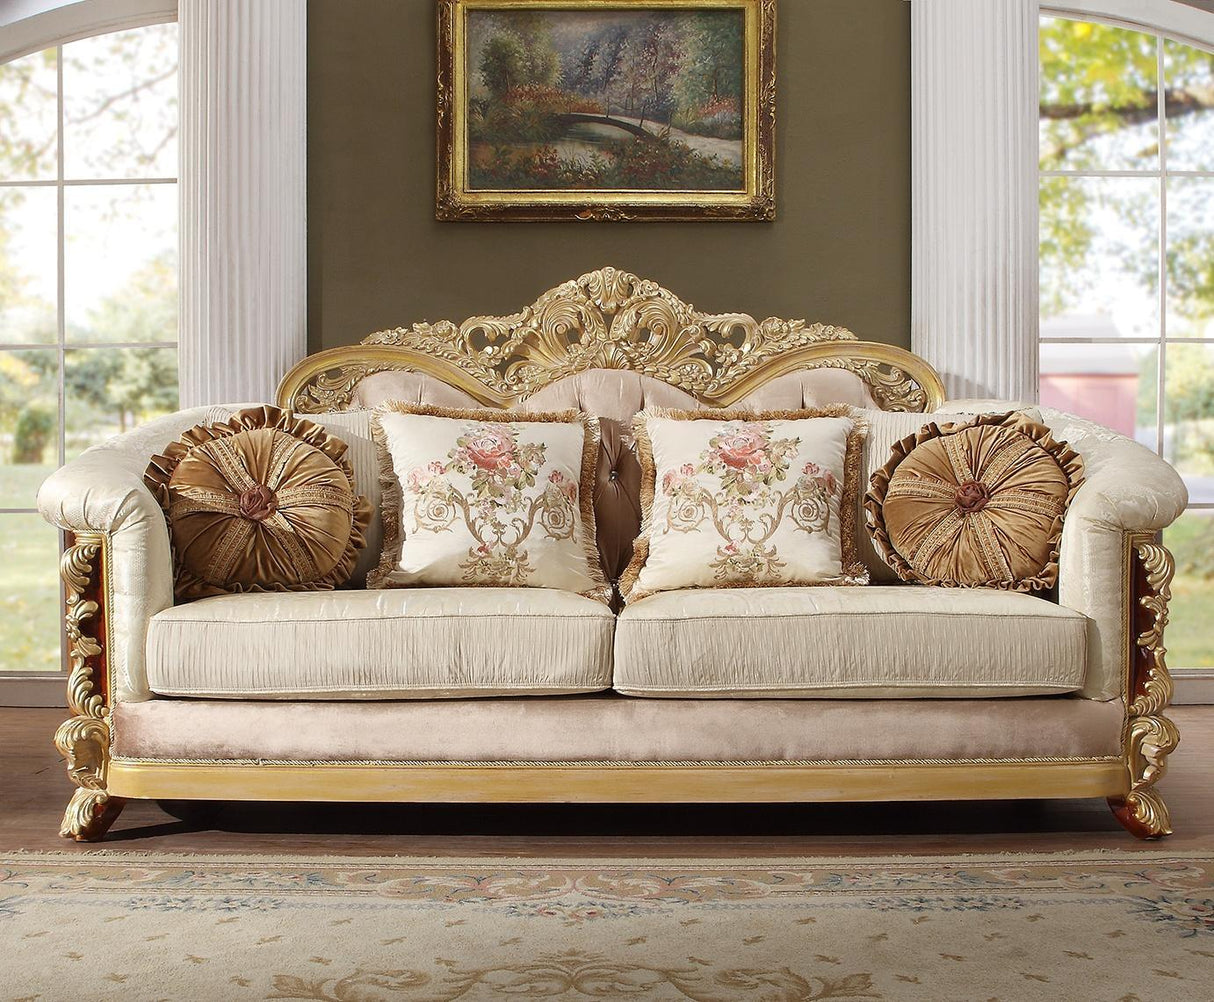 HD-821 Traditional Sofa and Loveseat in Luxury Brown & Beige color by Homey Design